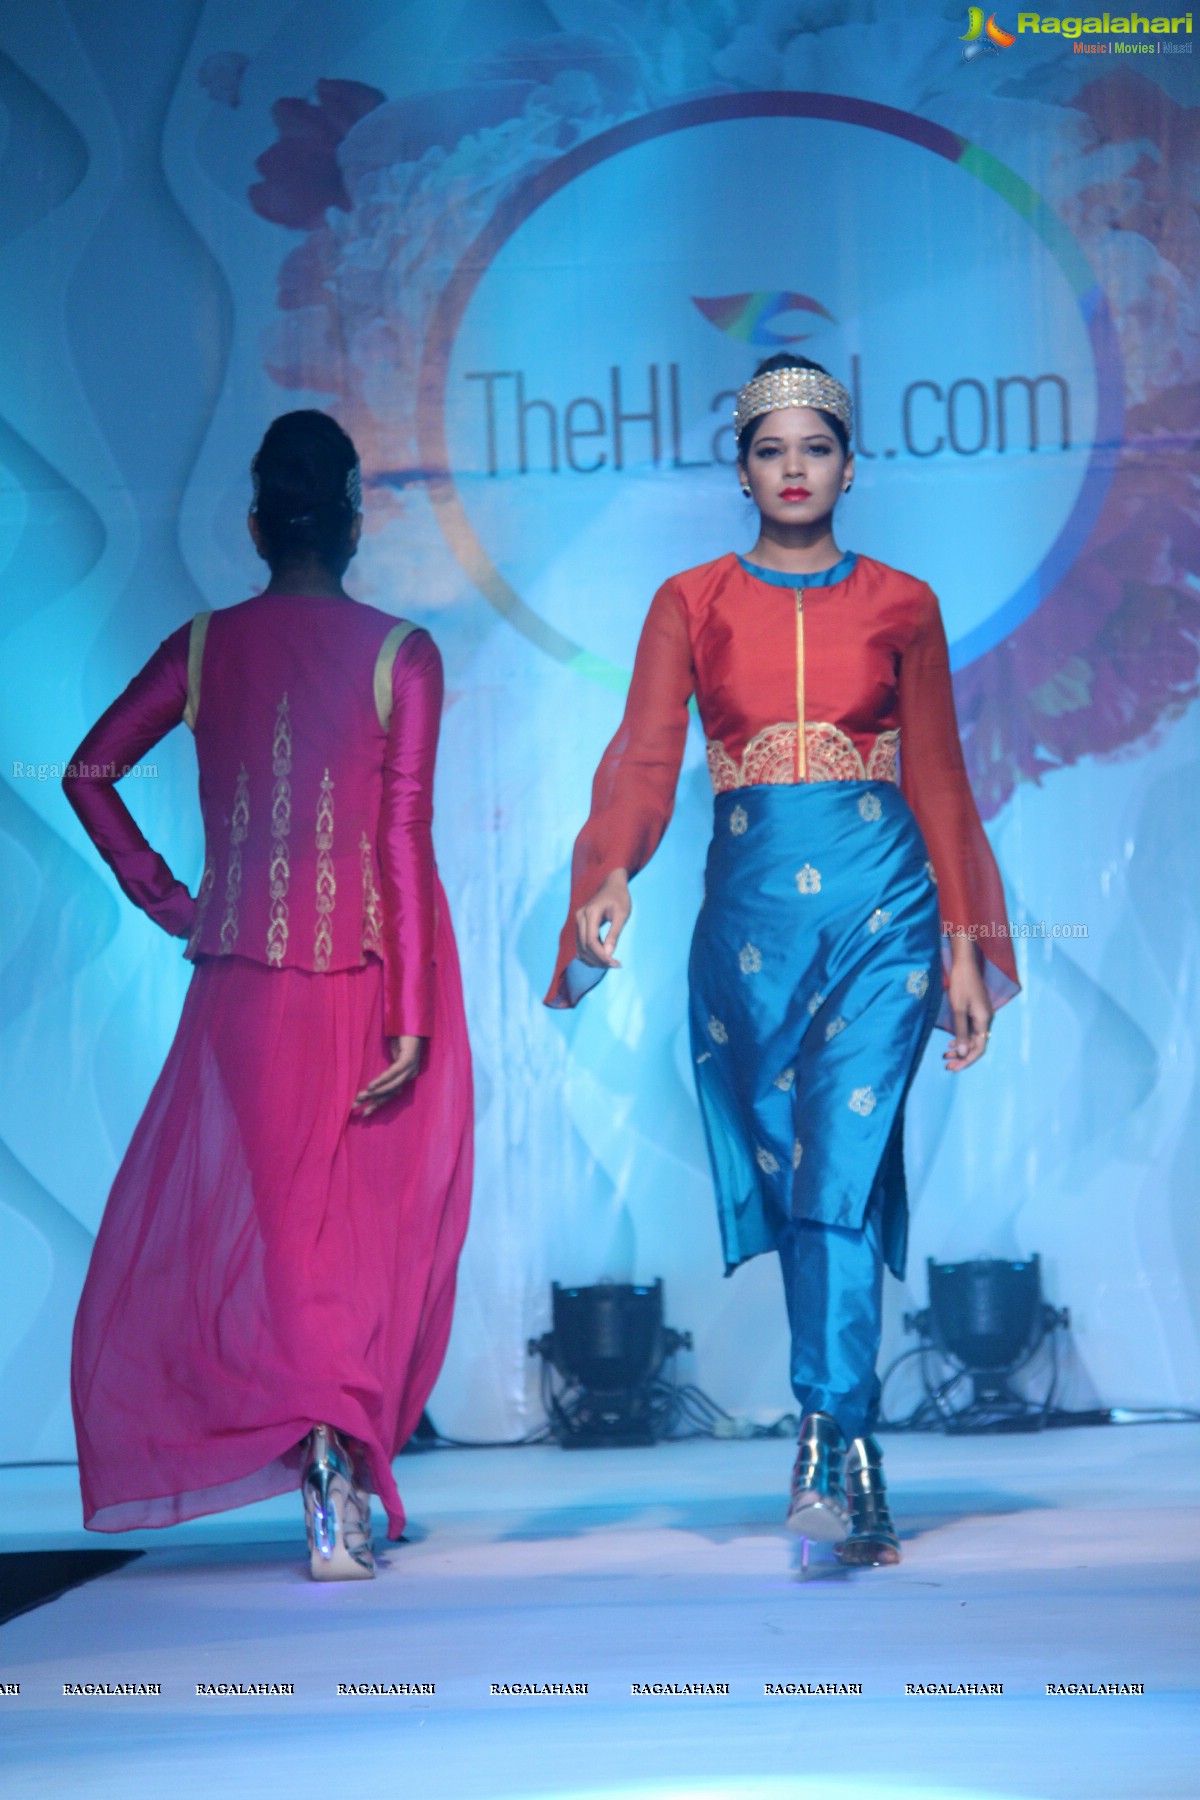 TheHLabel.com Fashion Show - Annual Event by HIFID